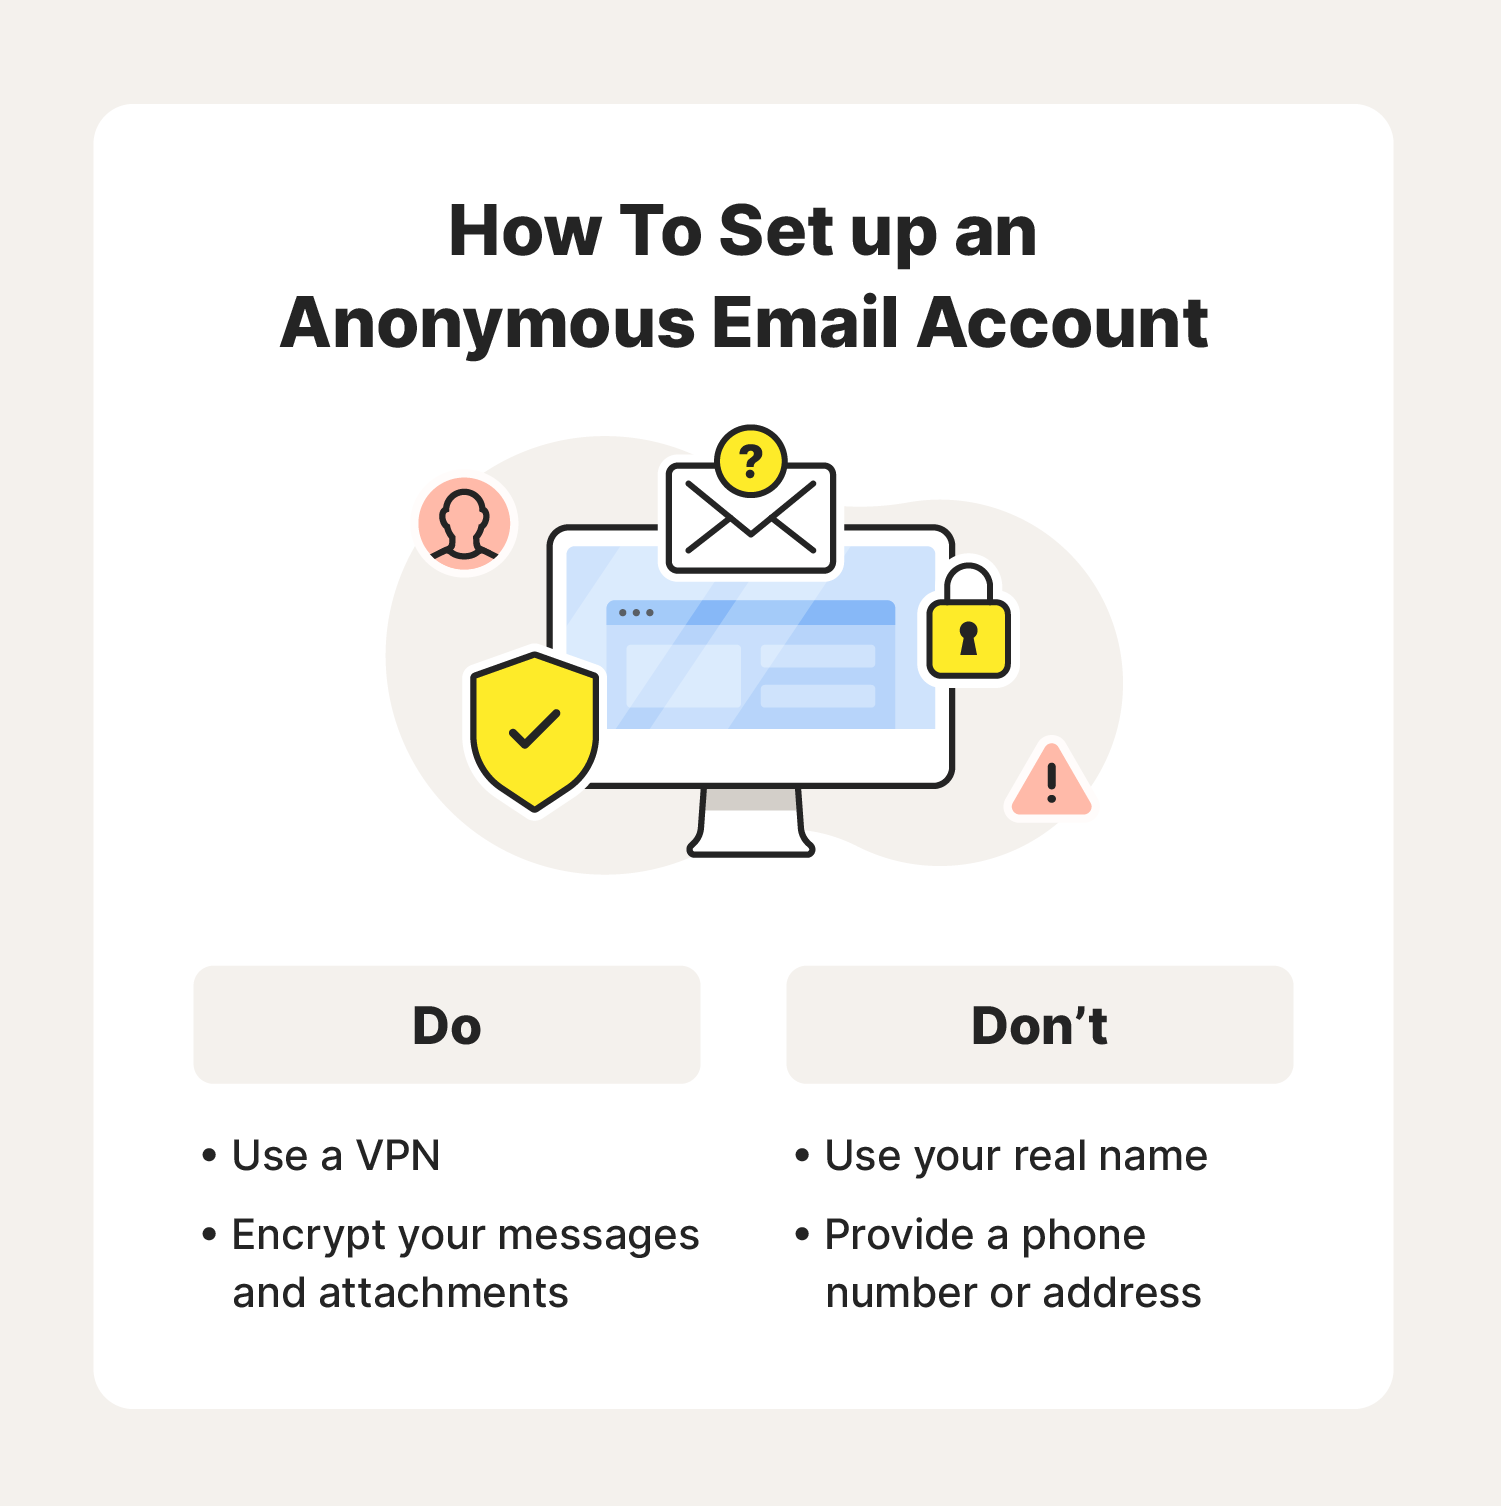 Illustrated chart explaining some dos and don’ts for setting up an anonymous email account safely.